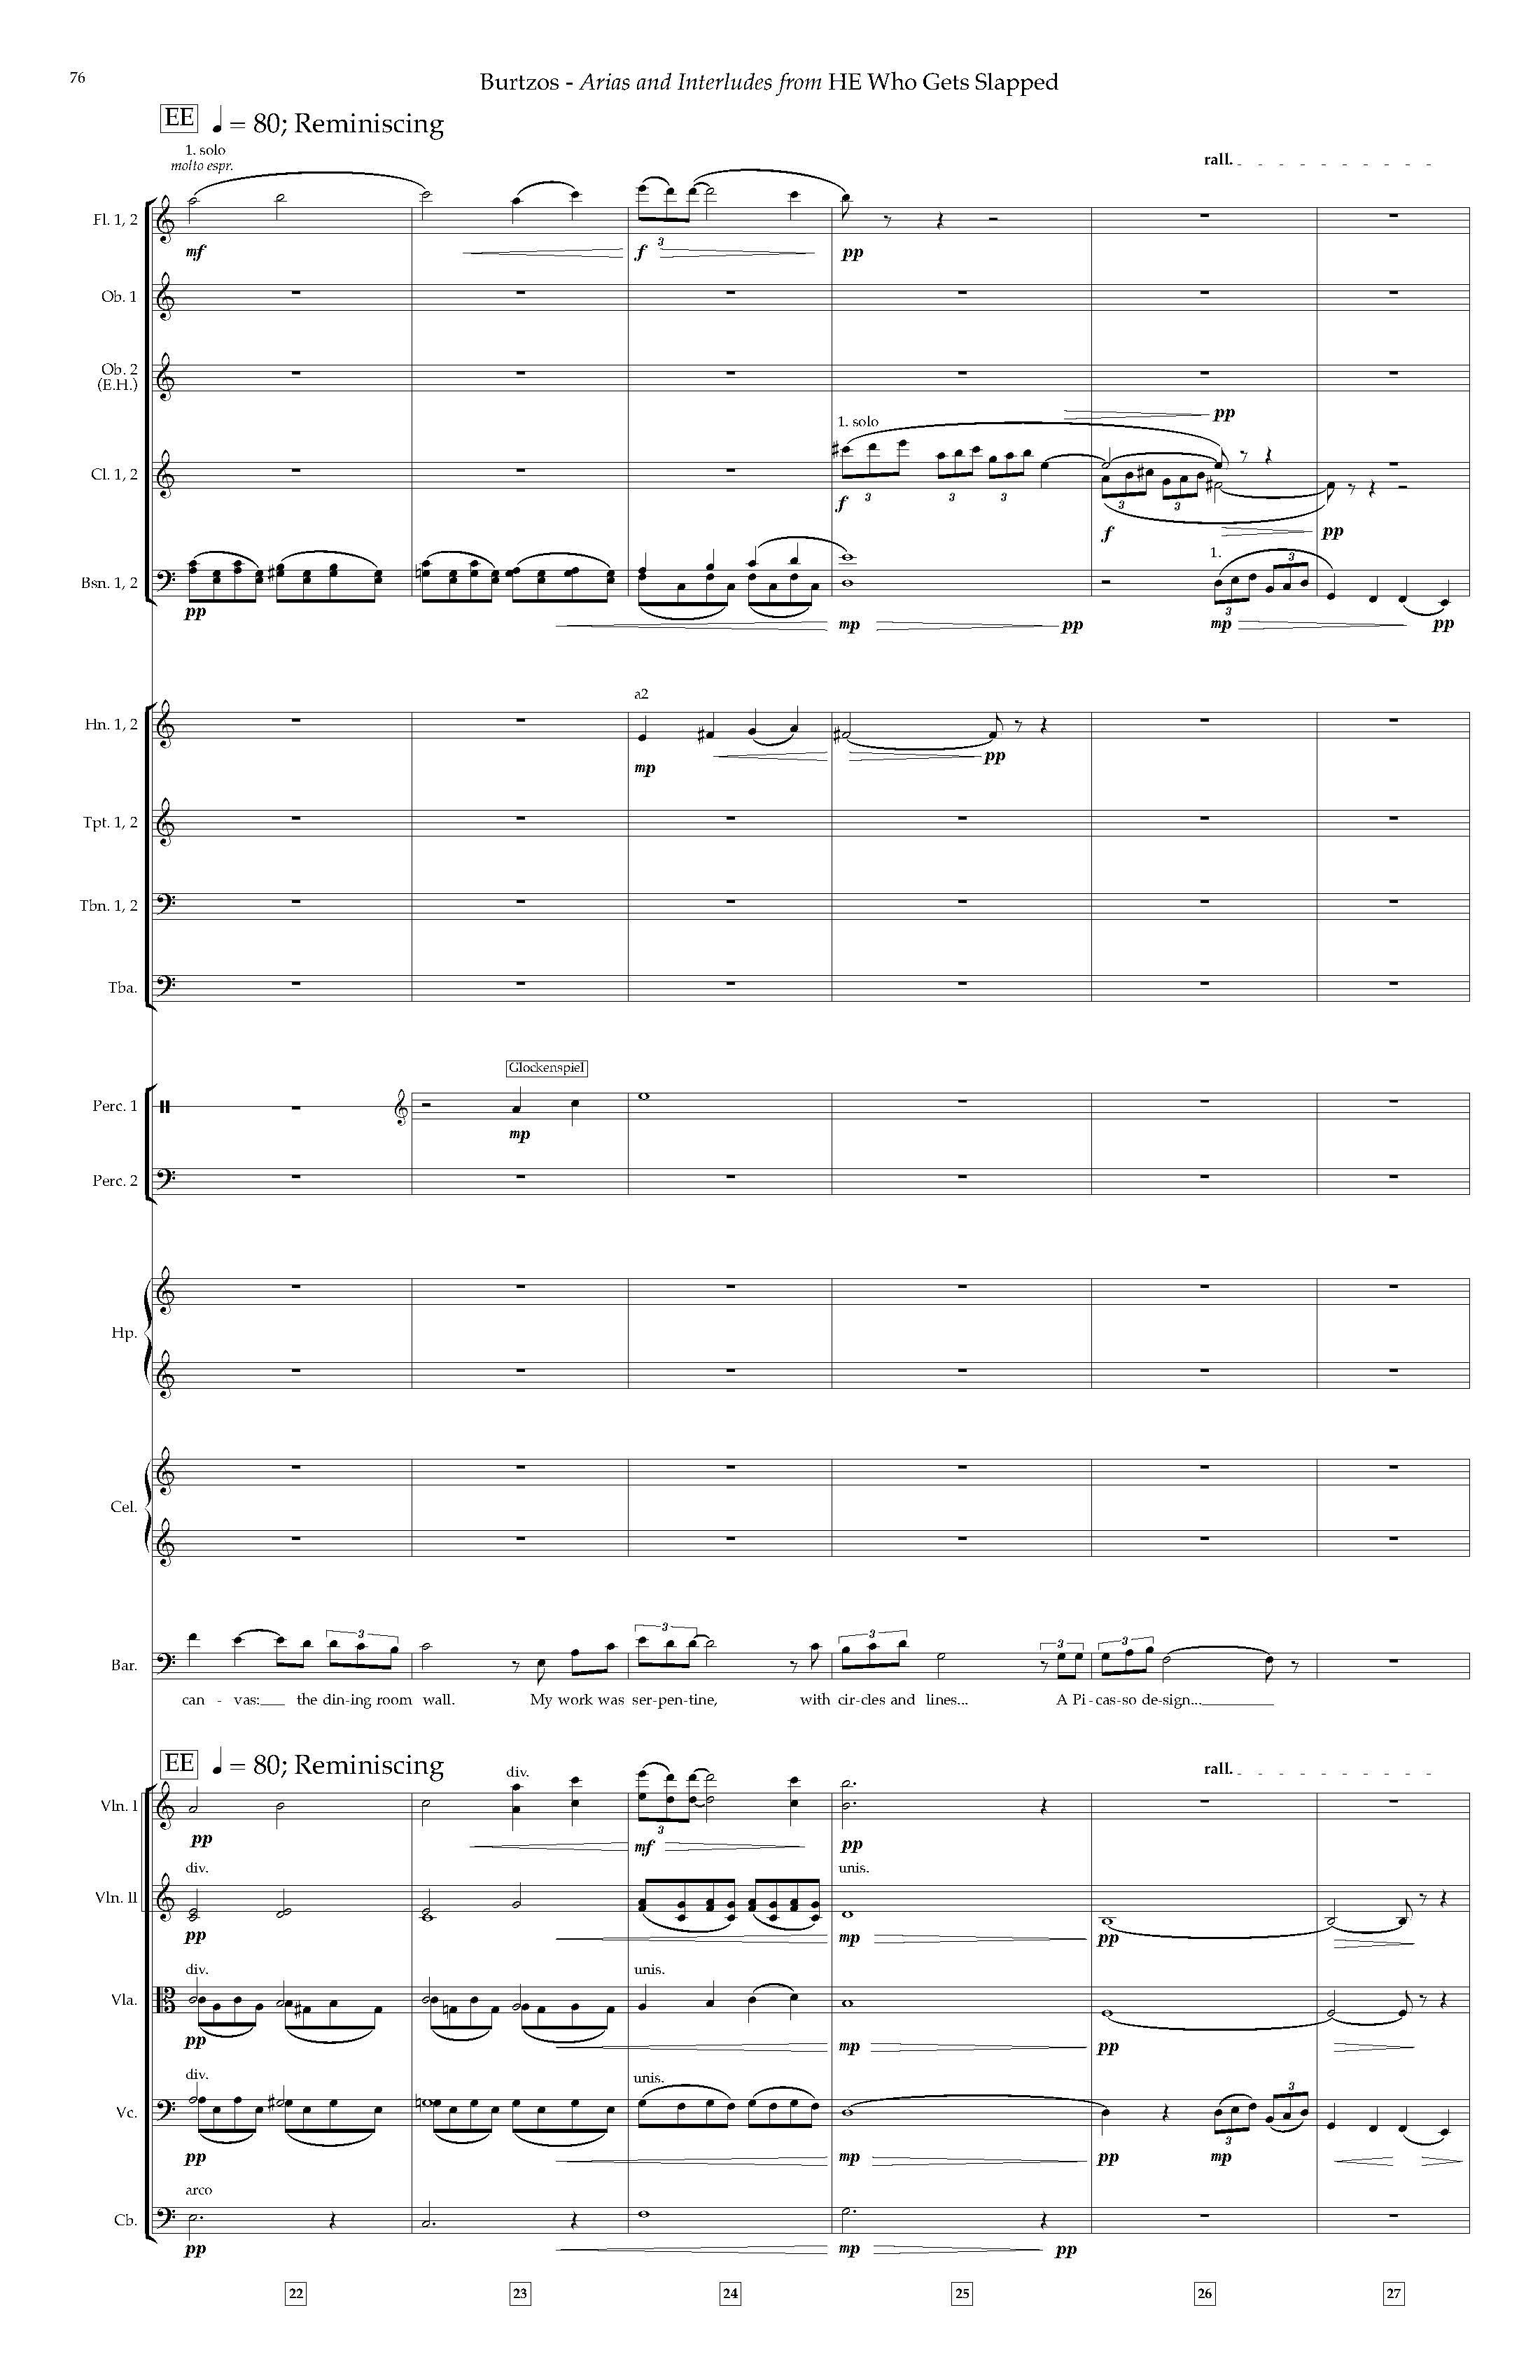 Arias and Interludes from HWGS - Complete Score_Page_82.jpg